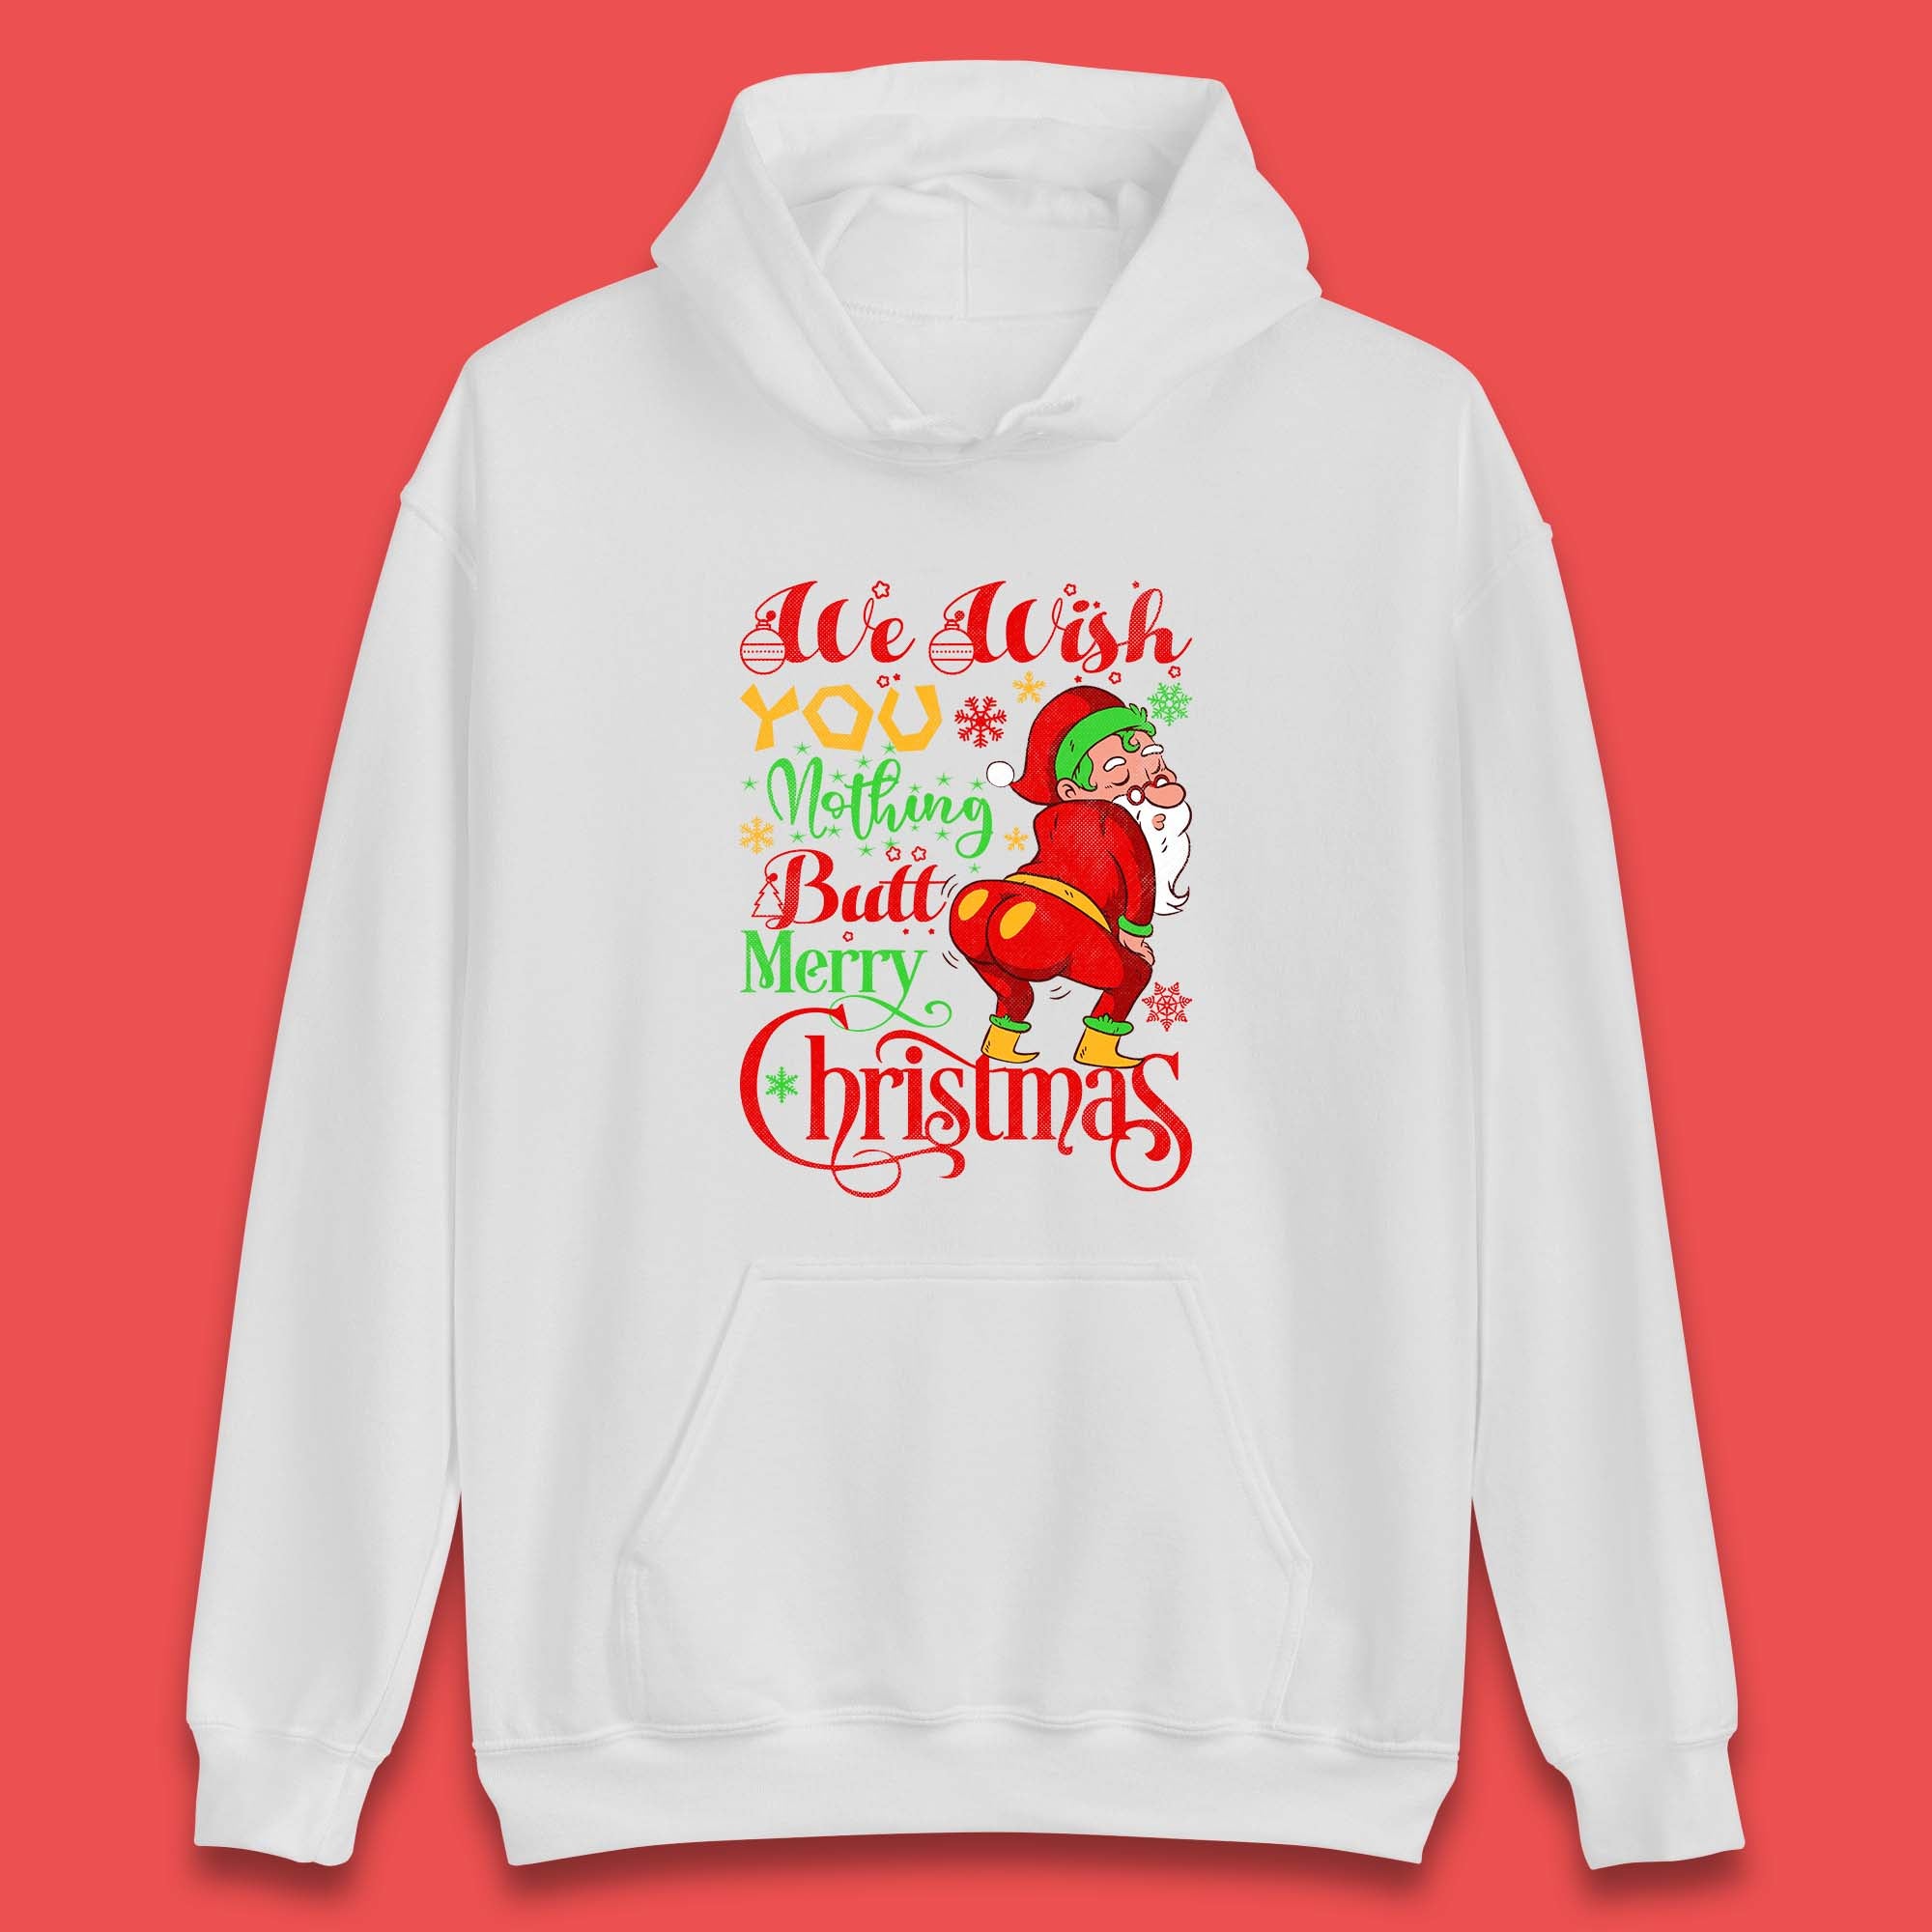 We Wish You Nothing Butt Merry Christmas Funny Naughty Santa Claus Xmas Unisex Hoodie